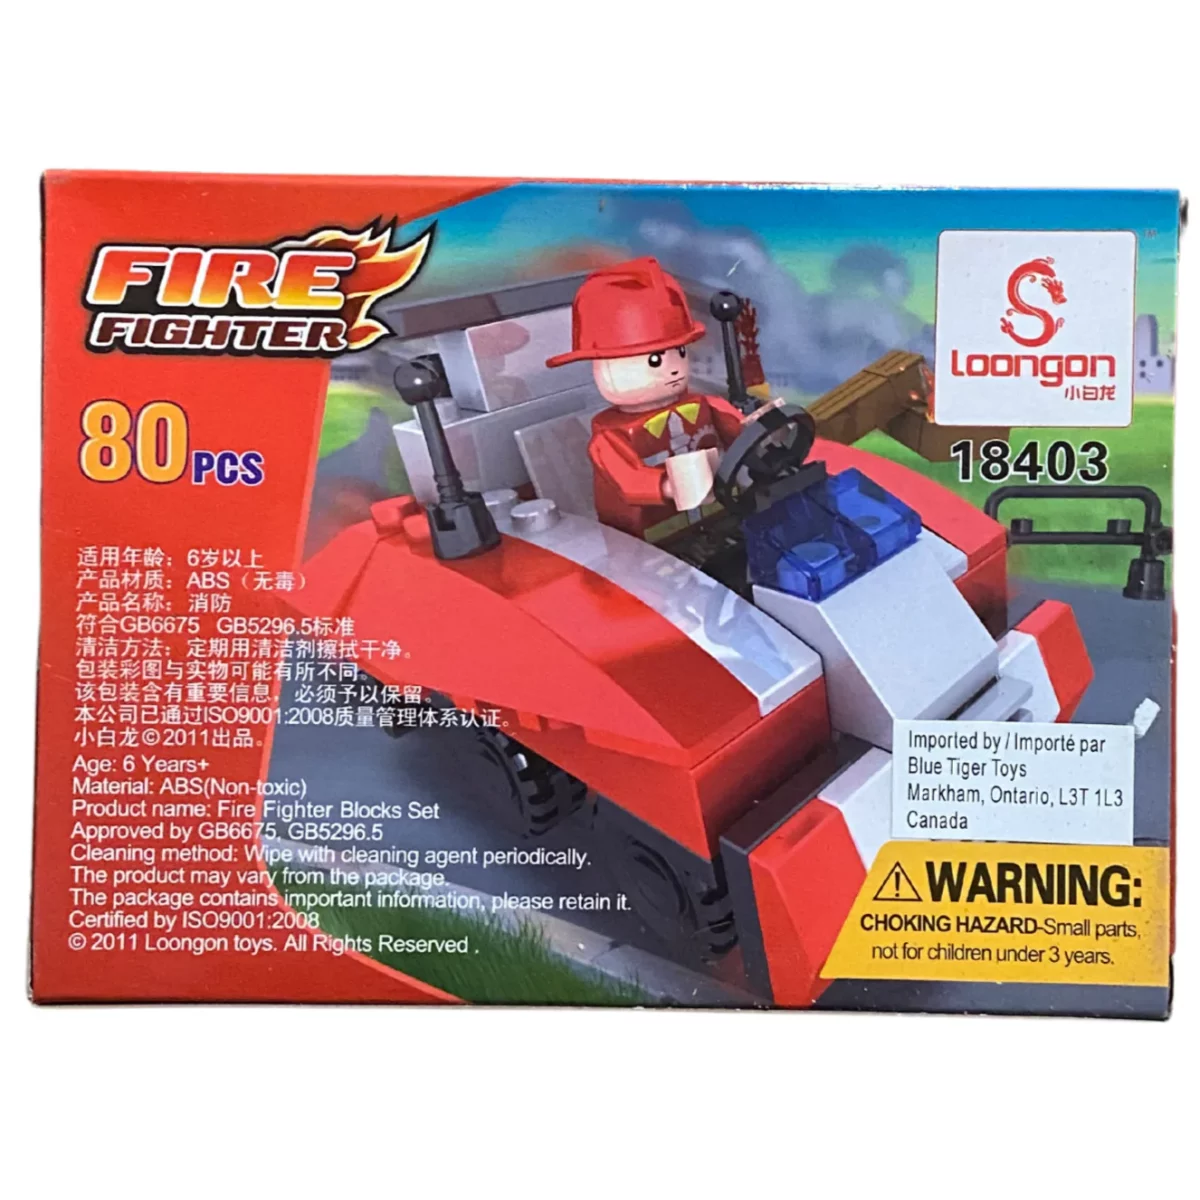 Loongon: Fire Fighter / 80 Pieces / Building Set